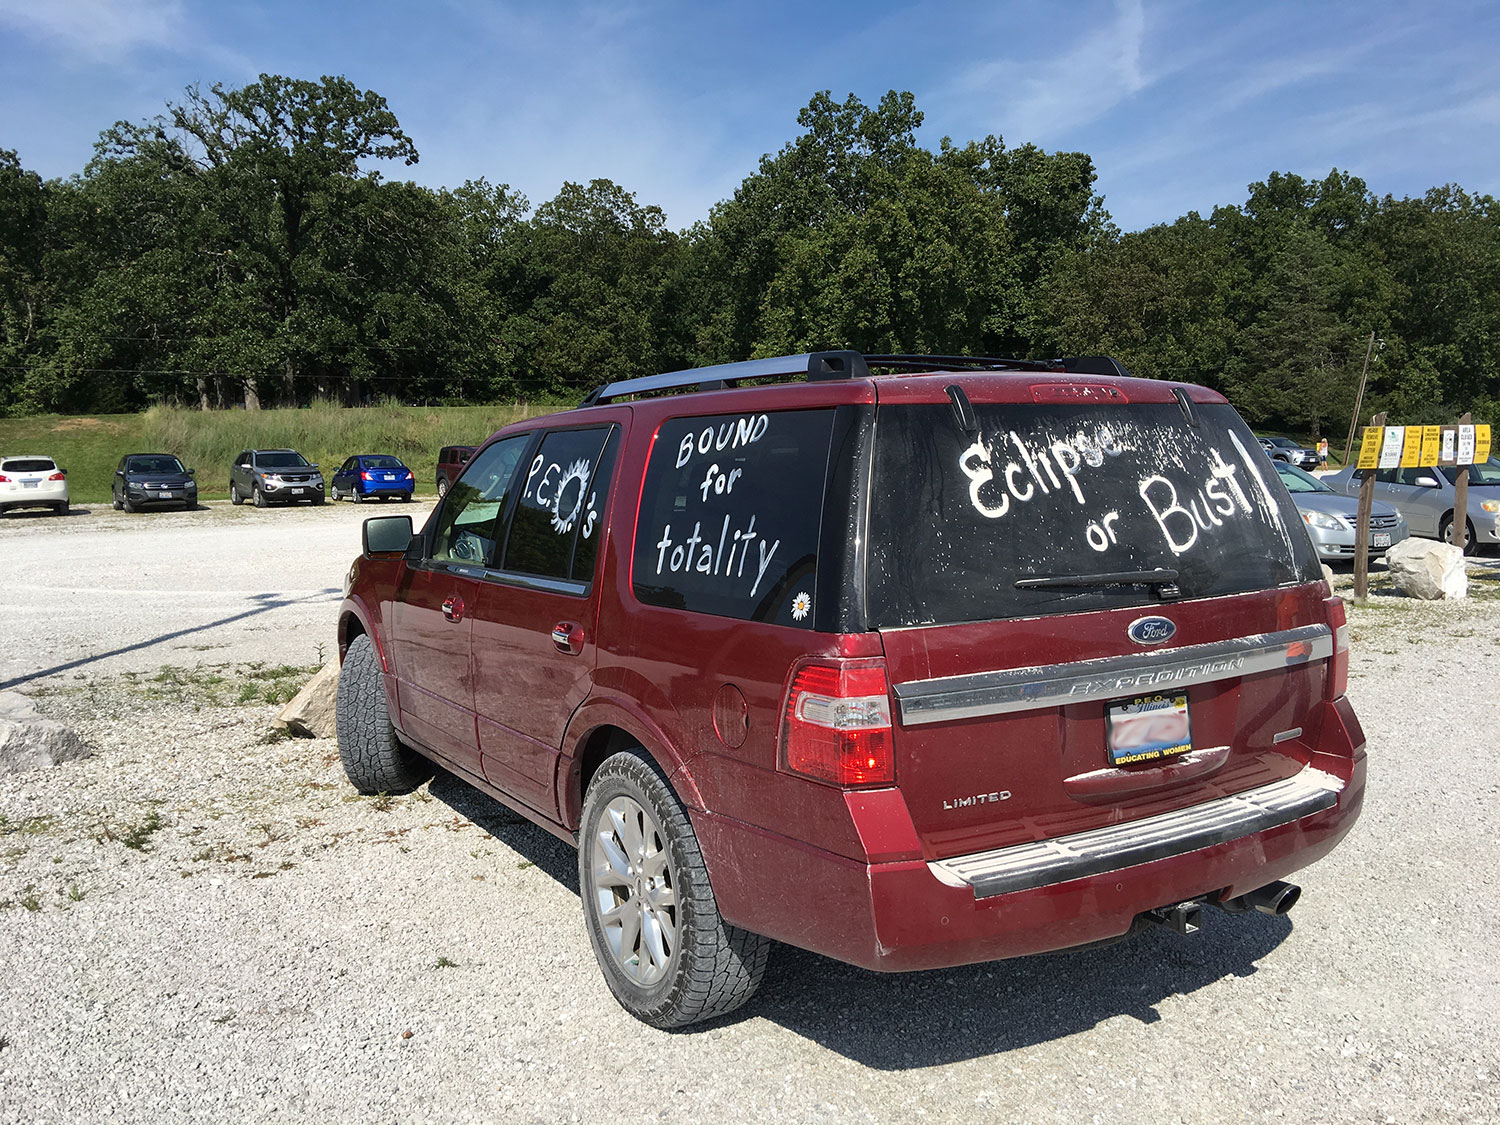 Car covered in writing excited for the eclipse